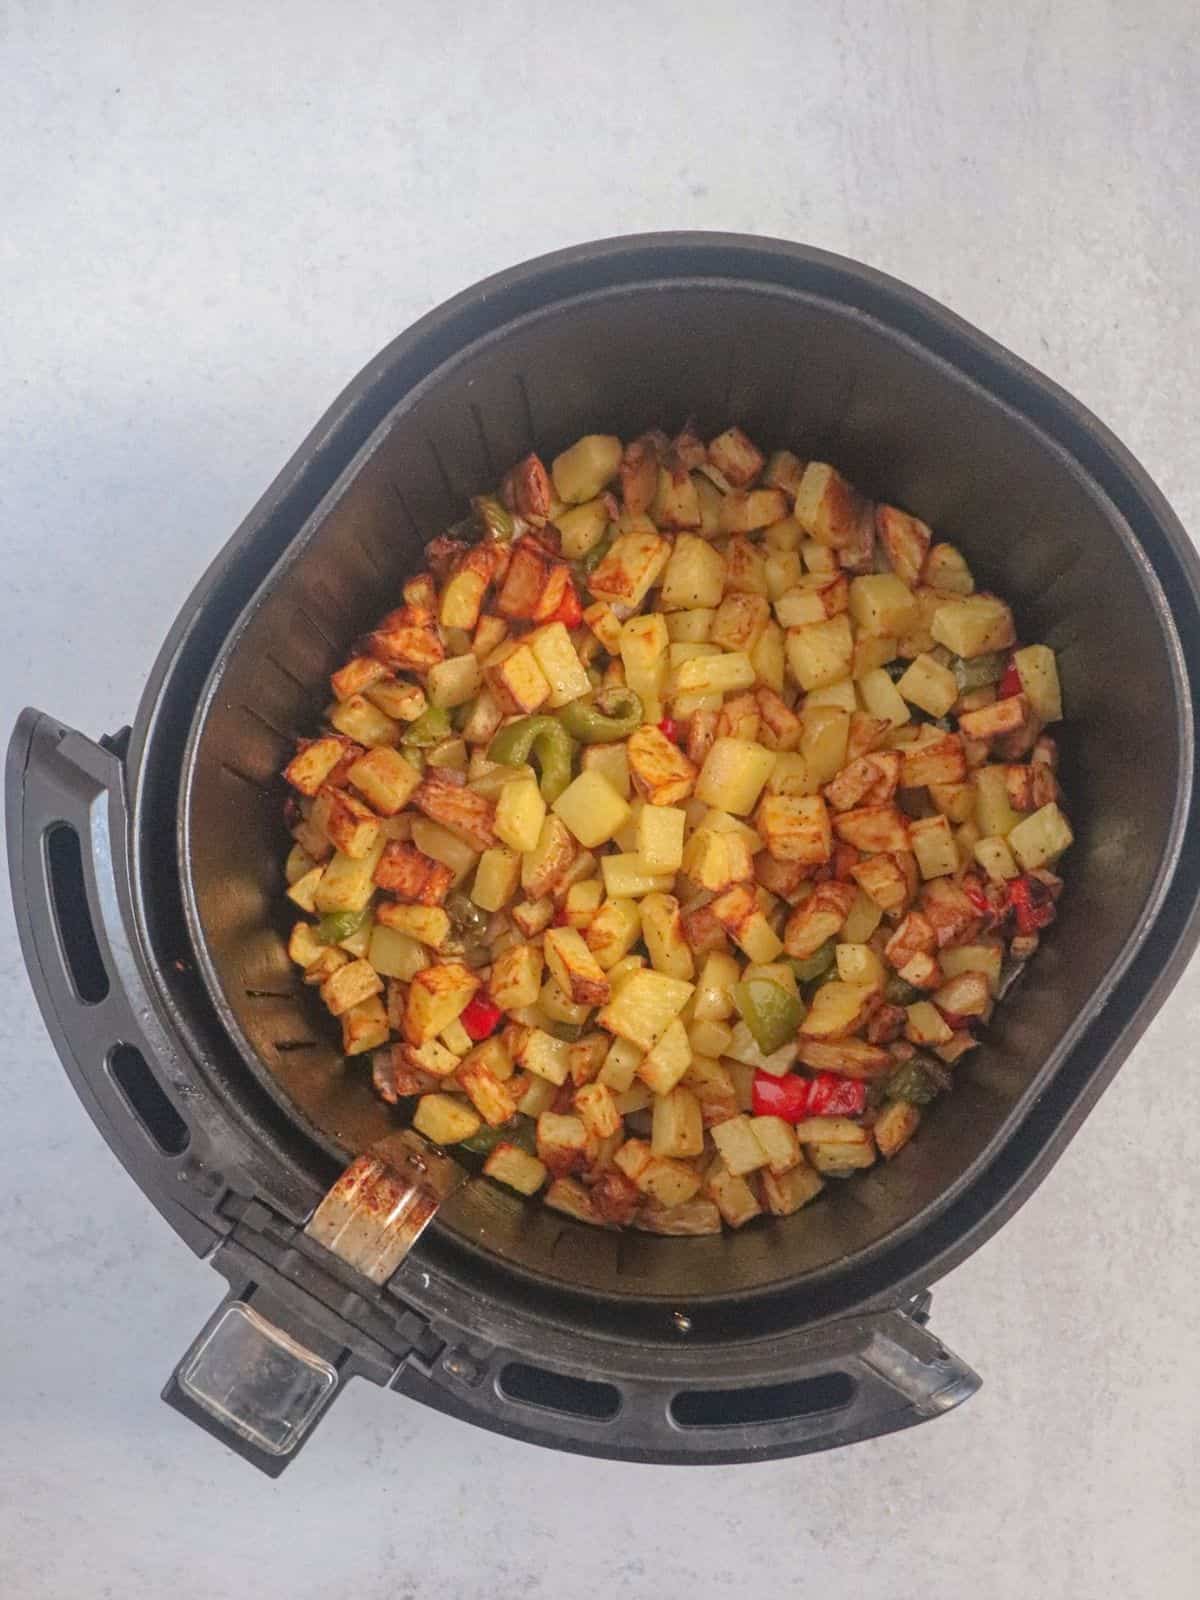 Air Fryer with peppers and vegetables post fry. 